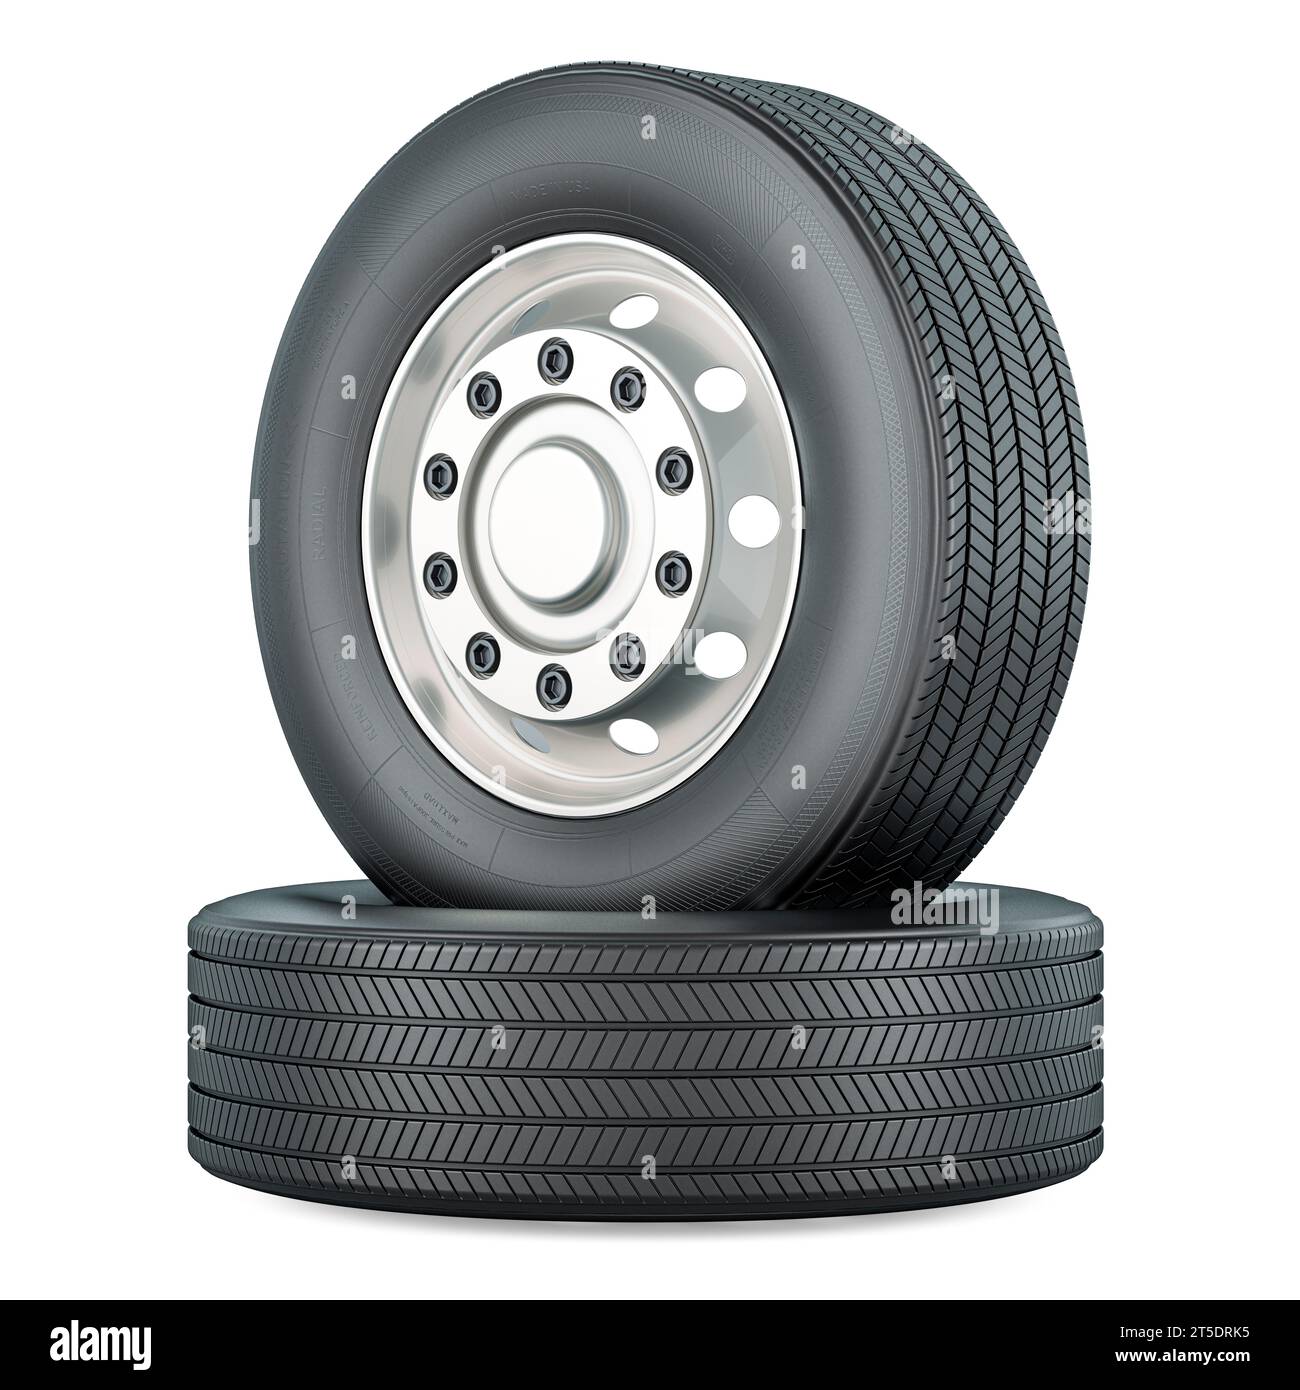 Bus or truck wheels with front rims, 3D rendering isolated on white background Stock Photo